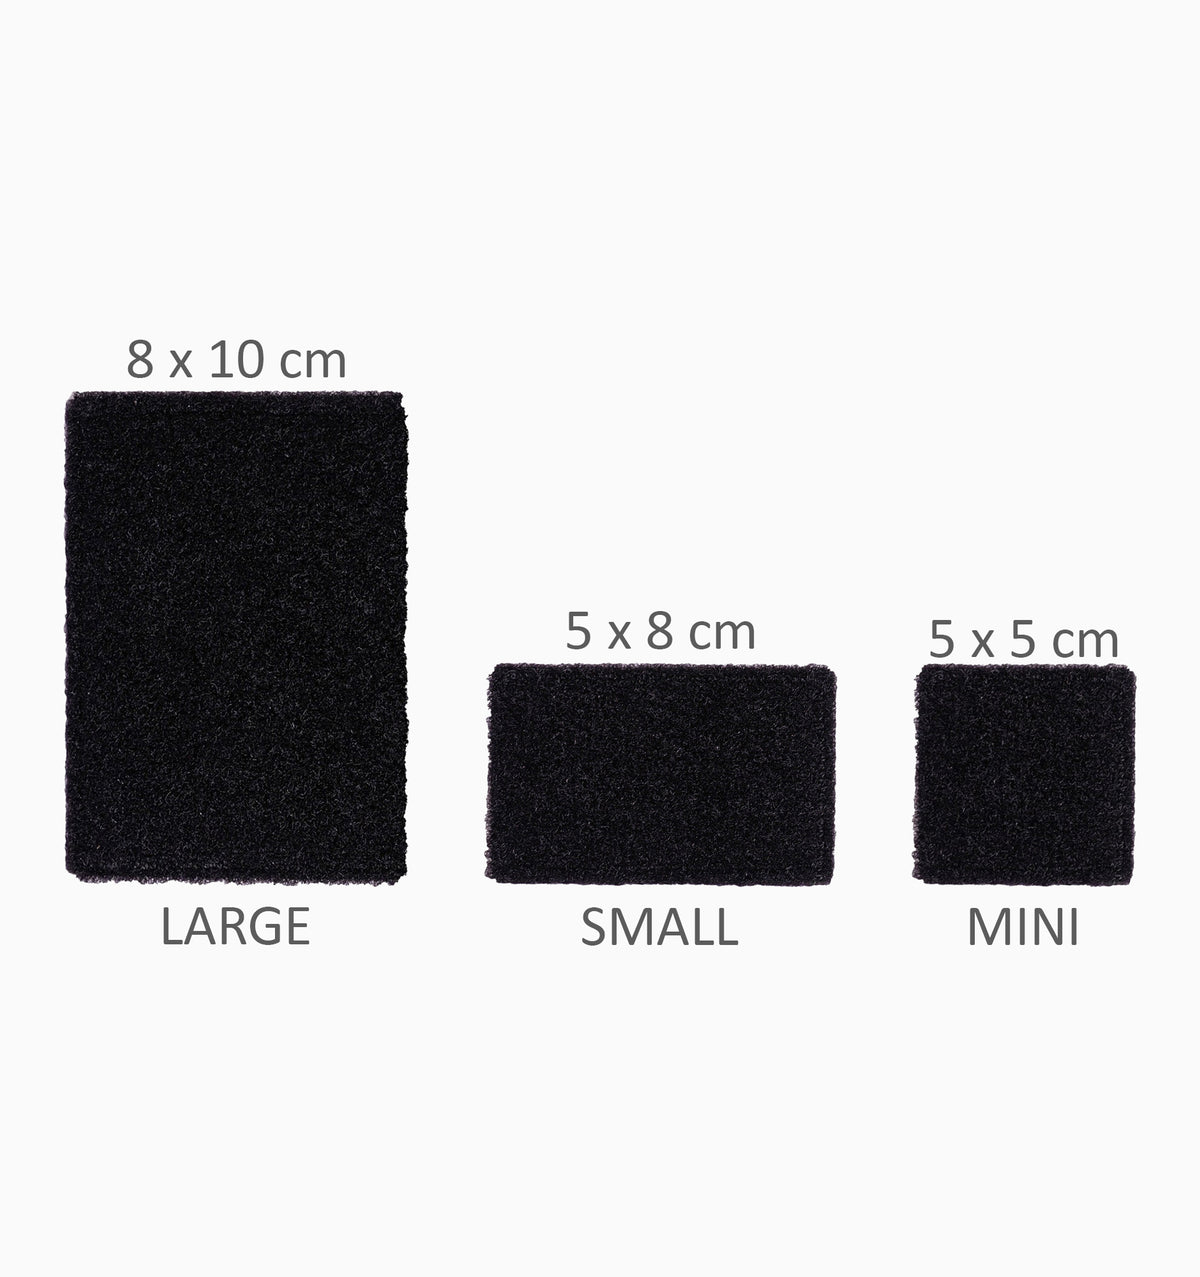 Magnepatch - Small - Black